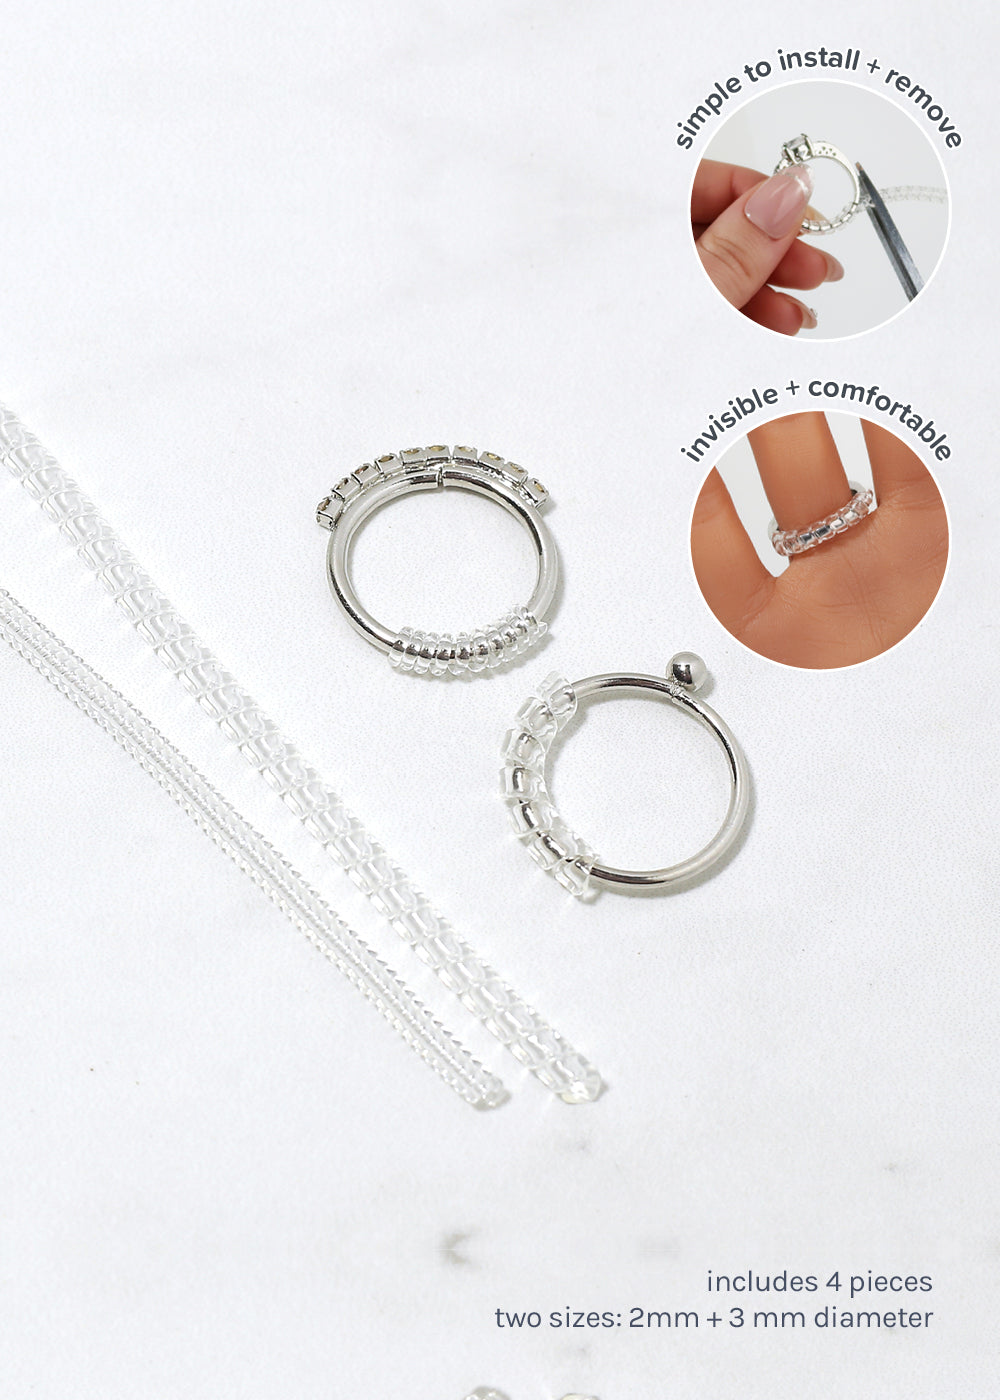 3 Sheets Ring Adjuster for Loose Rings DIY Invisible Indonesia